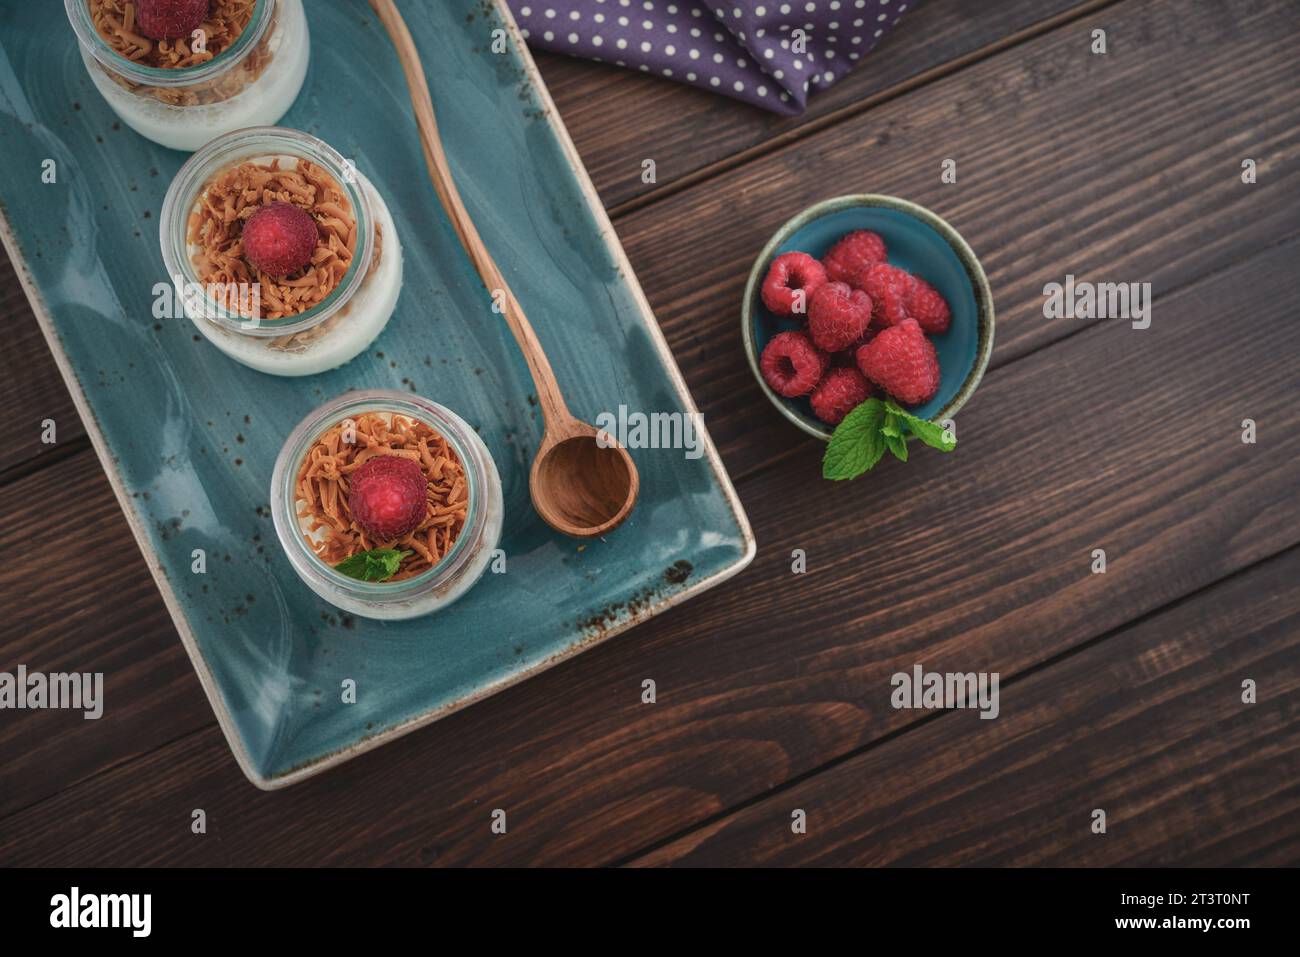 Dessert panna cotta with caramel cheese and fresh raspberry on wooden background Stock Photo